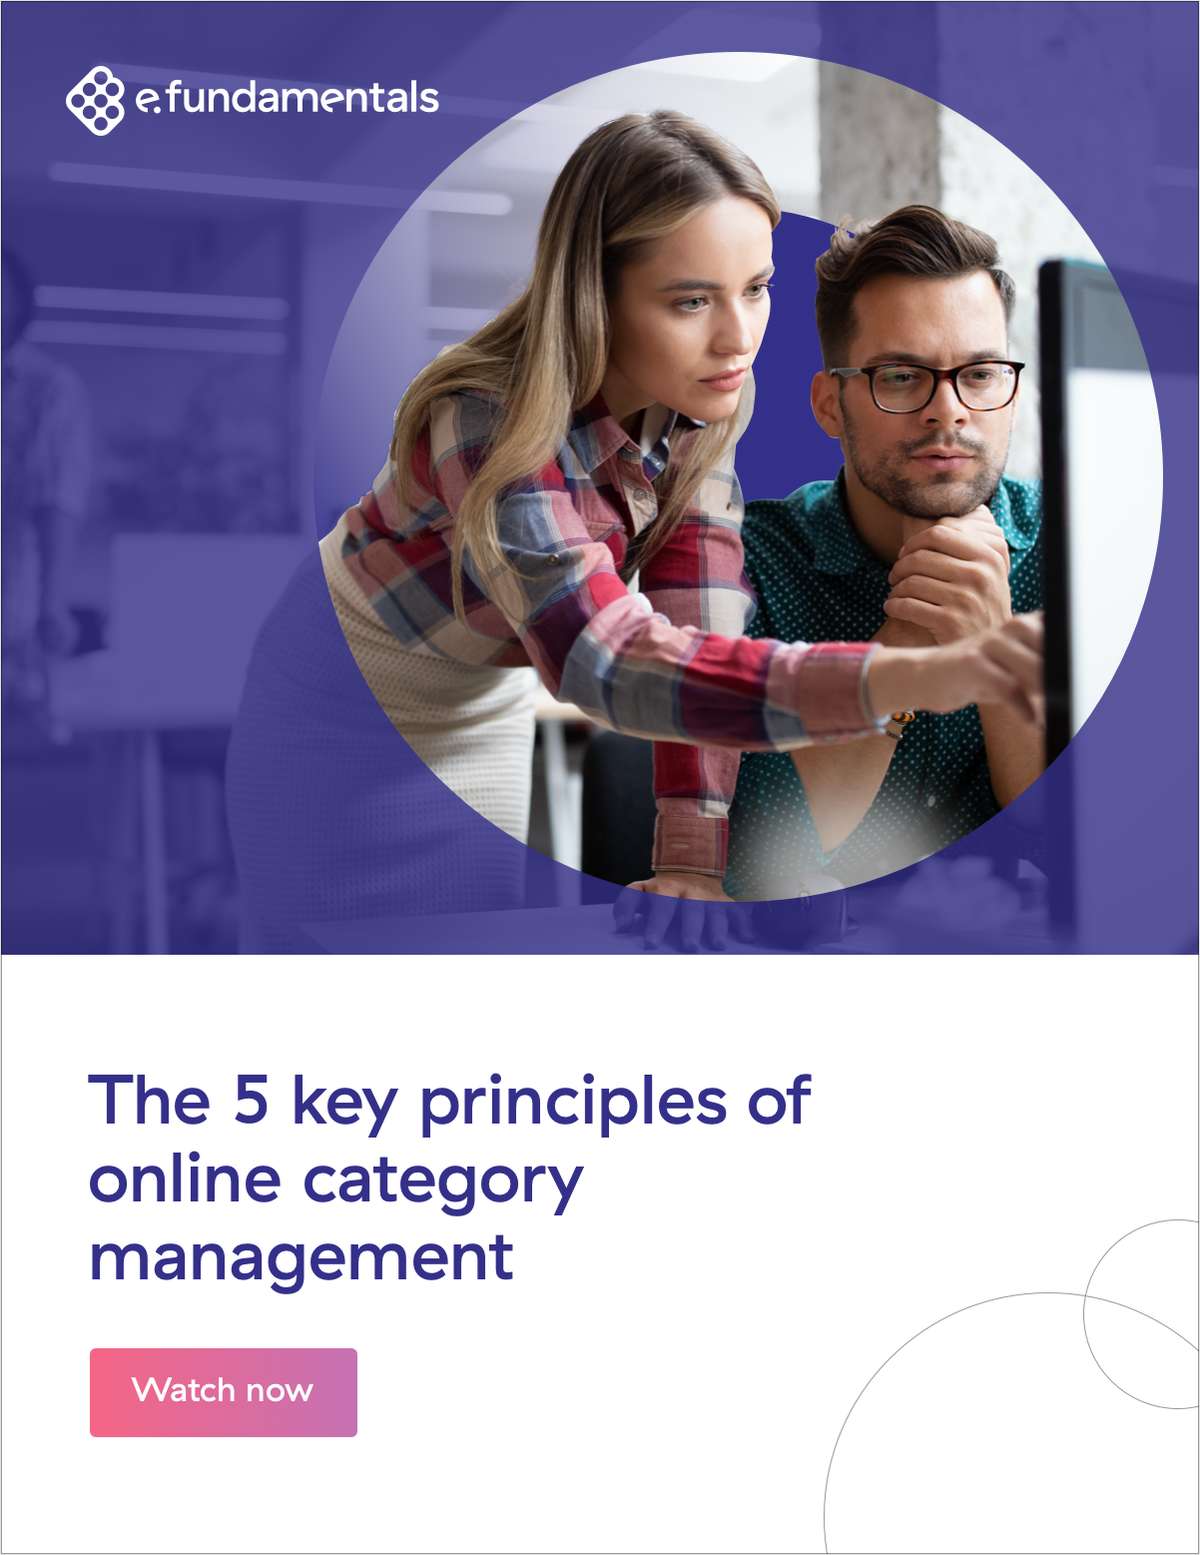 The 5 key principles of online category management